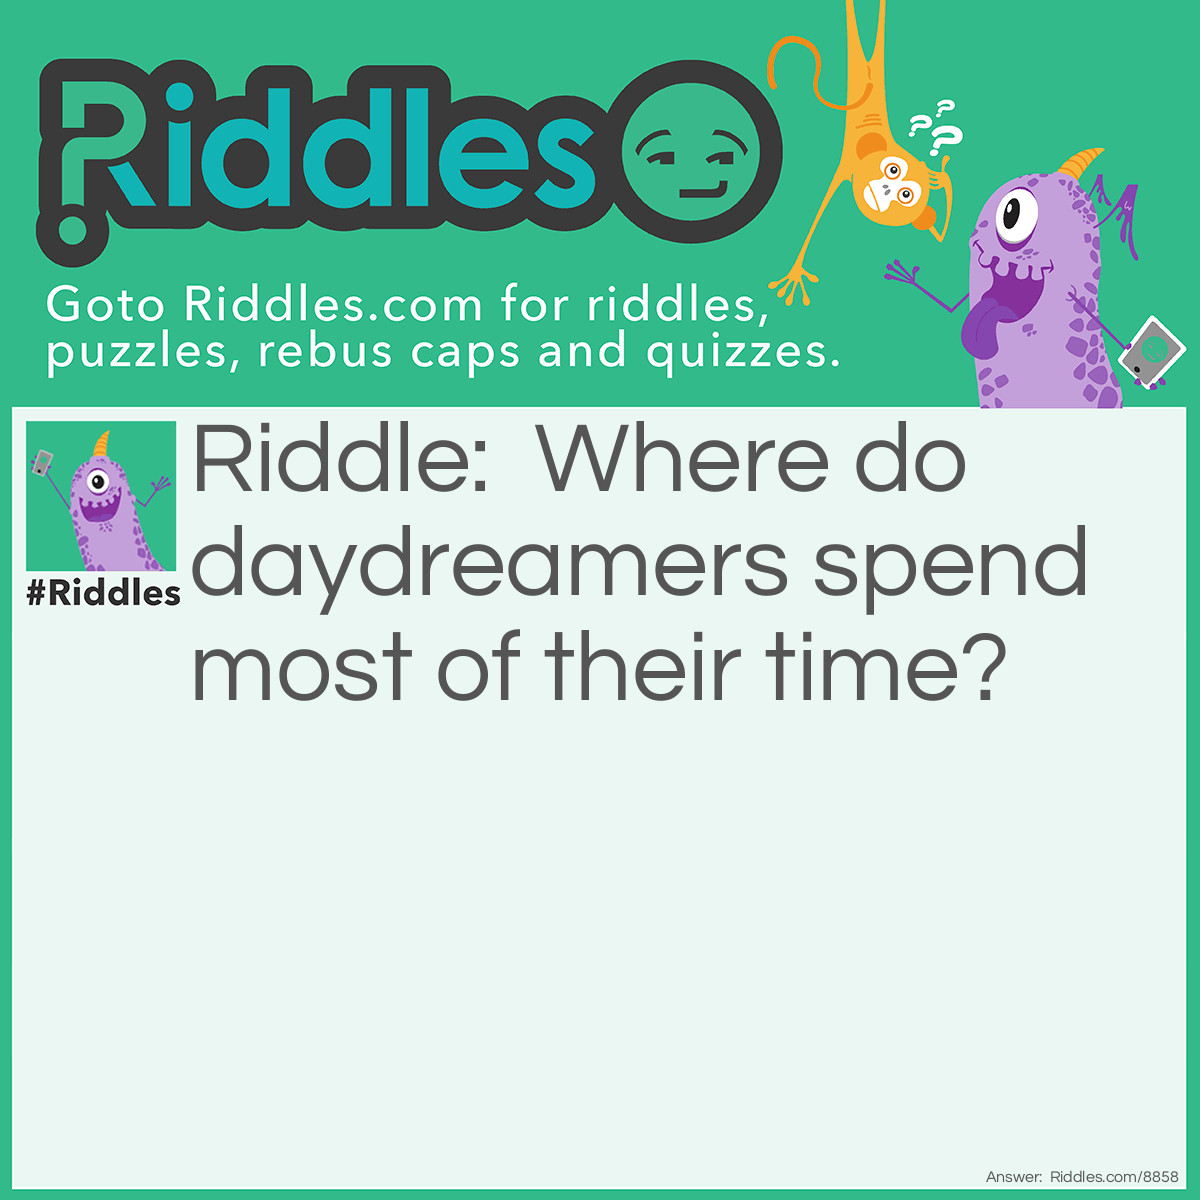 Riddle: Where do daydreamers spend most of their time? Answer: Riddles.com